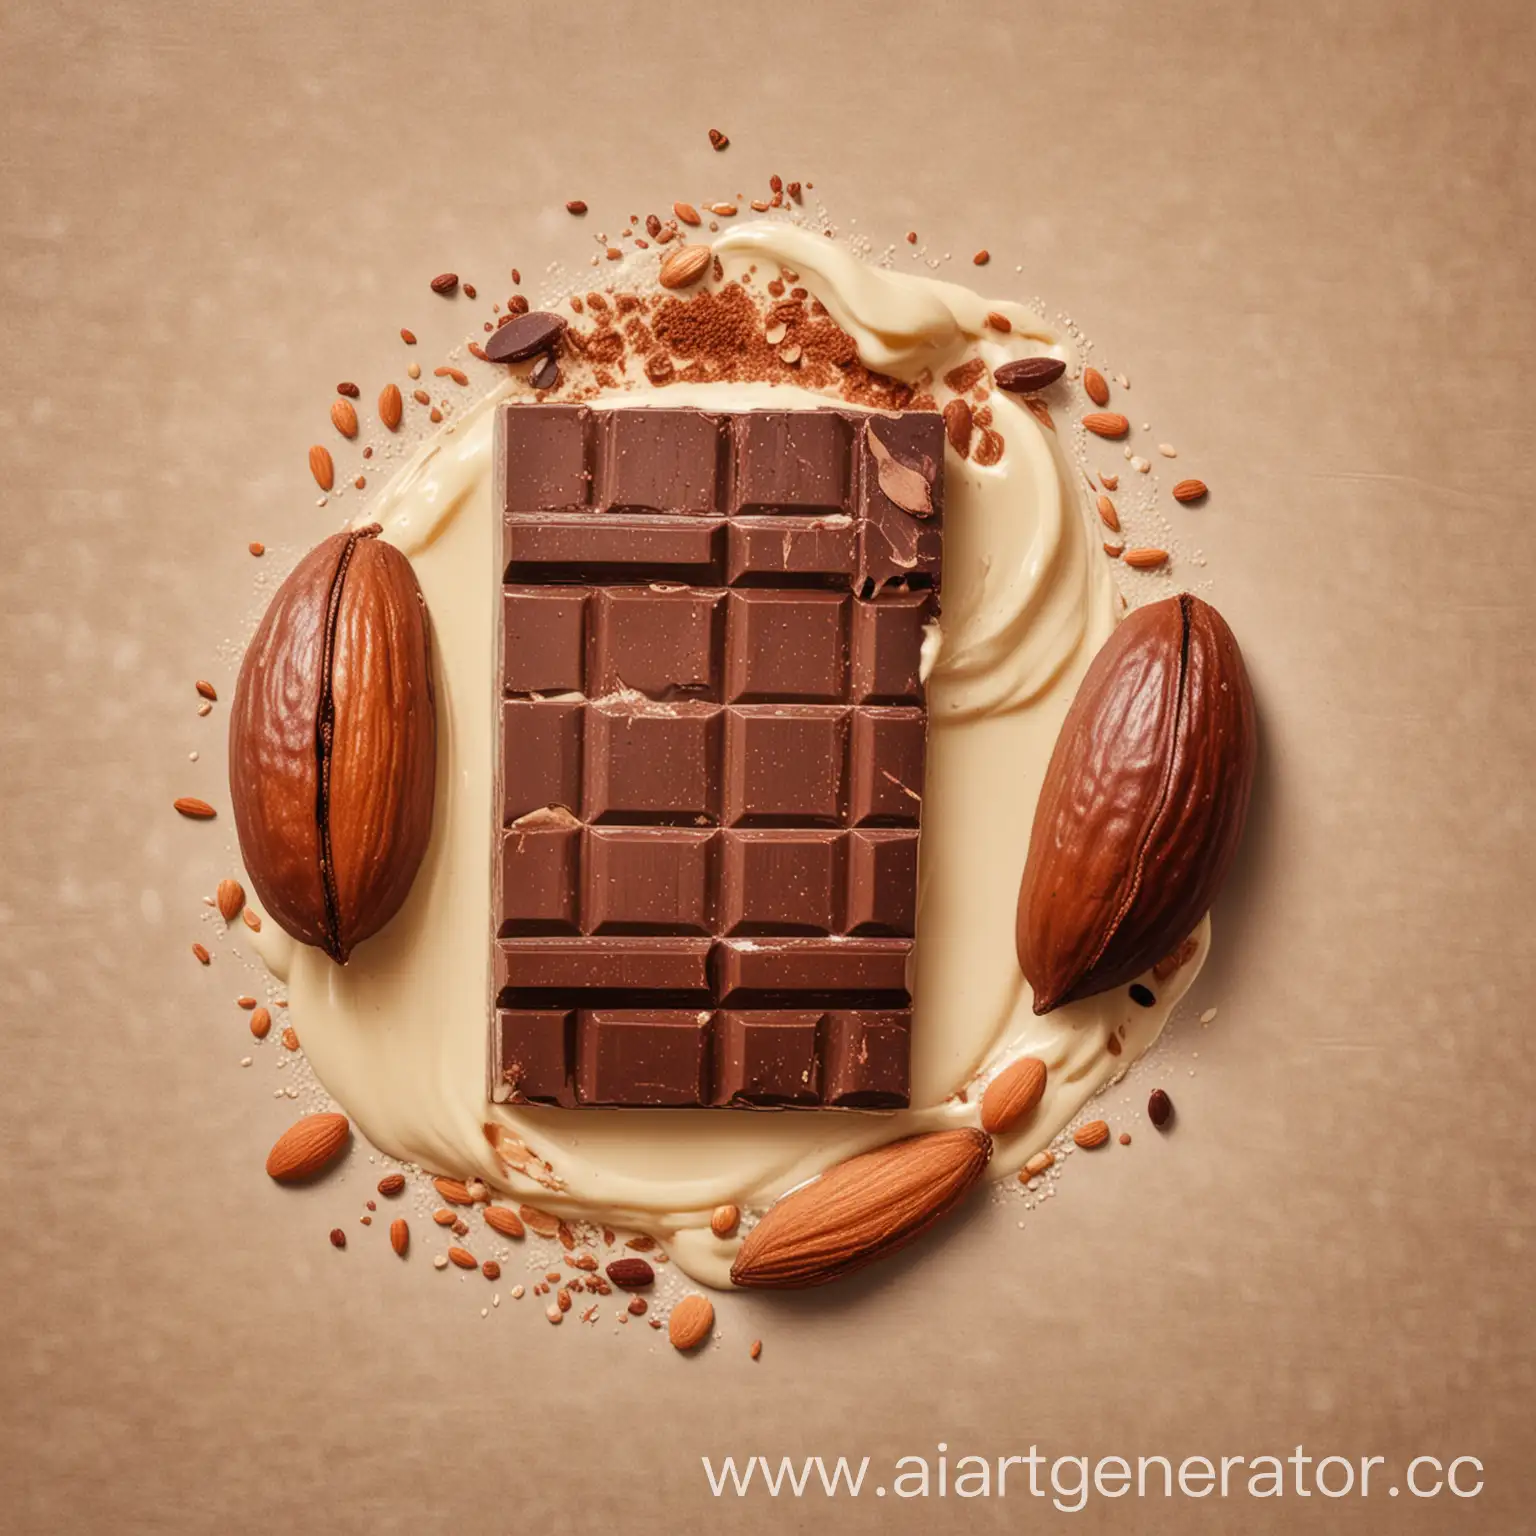 Artisanal-Chocolate-Advertisement-Handcrafted-Delicacies-with-Almond-Milk